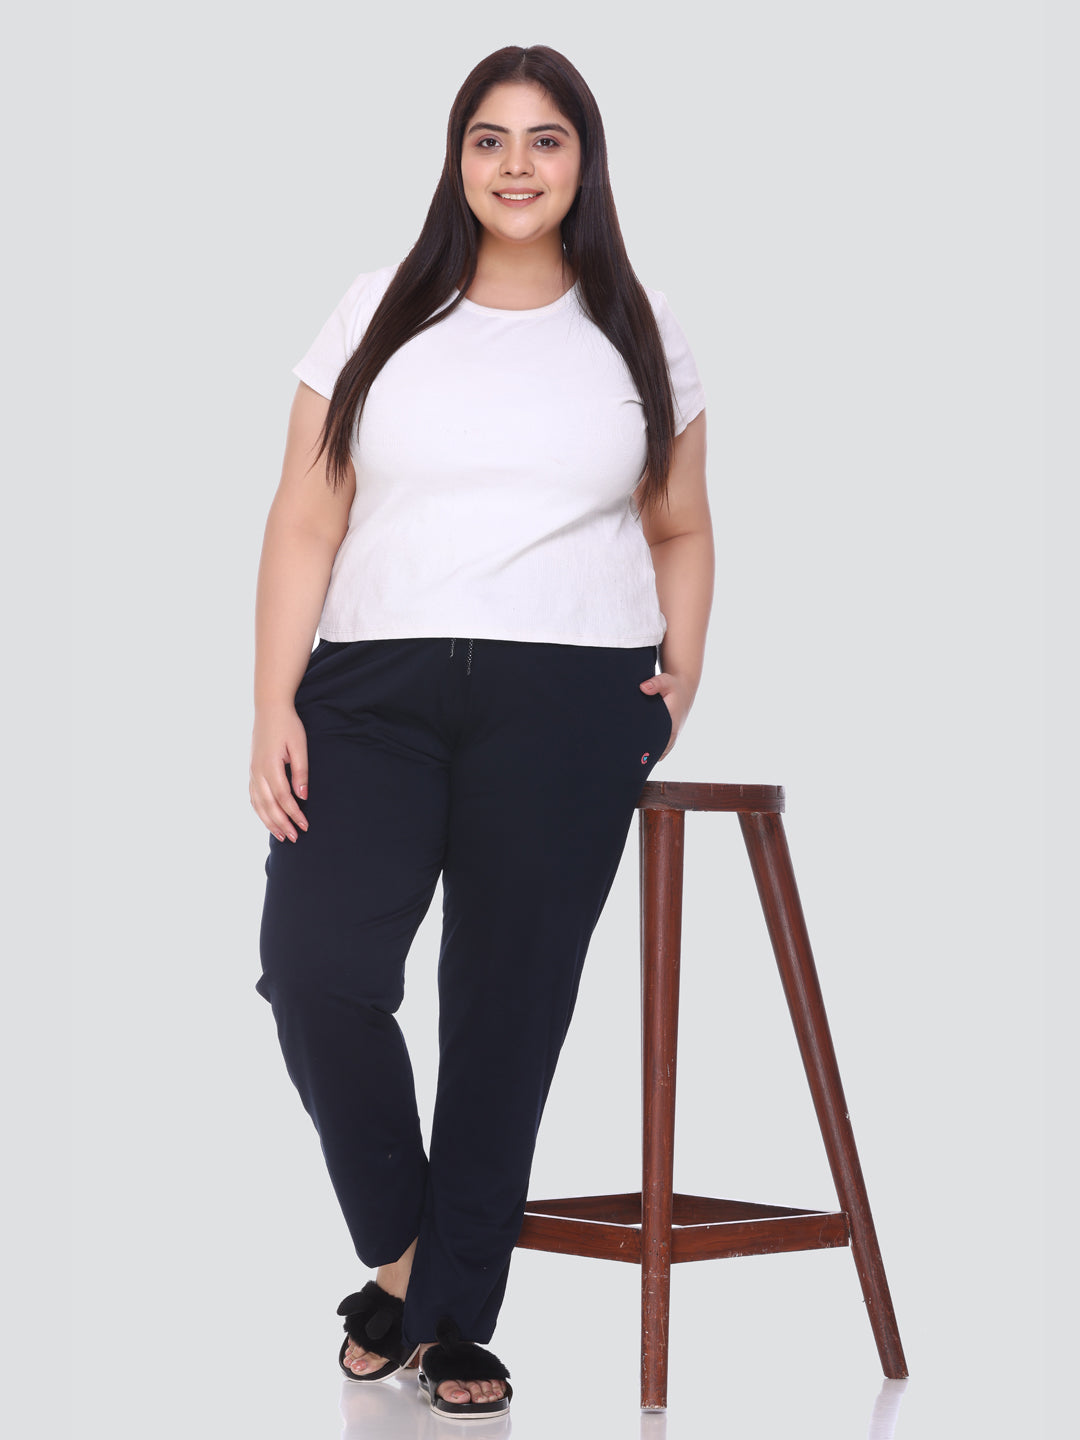 Comfy Navy Blue Cotton Track Pants For Women At Best Prices